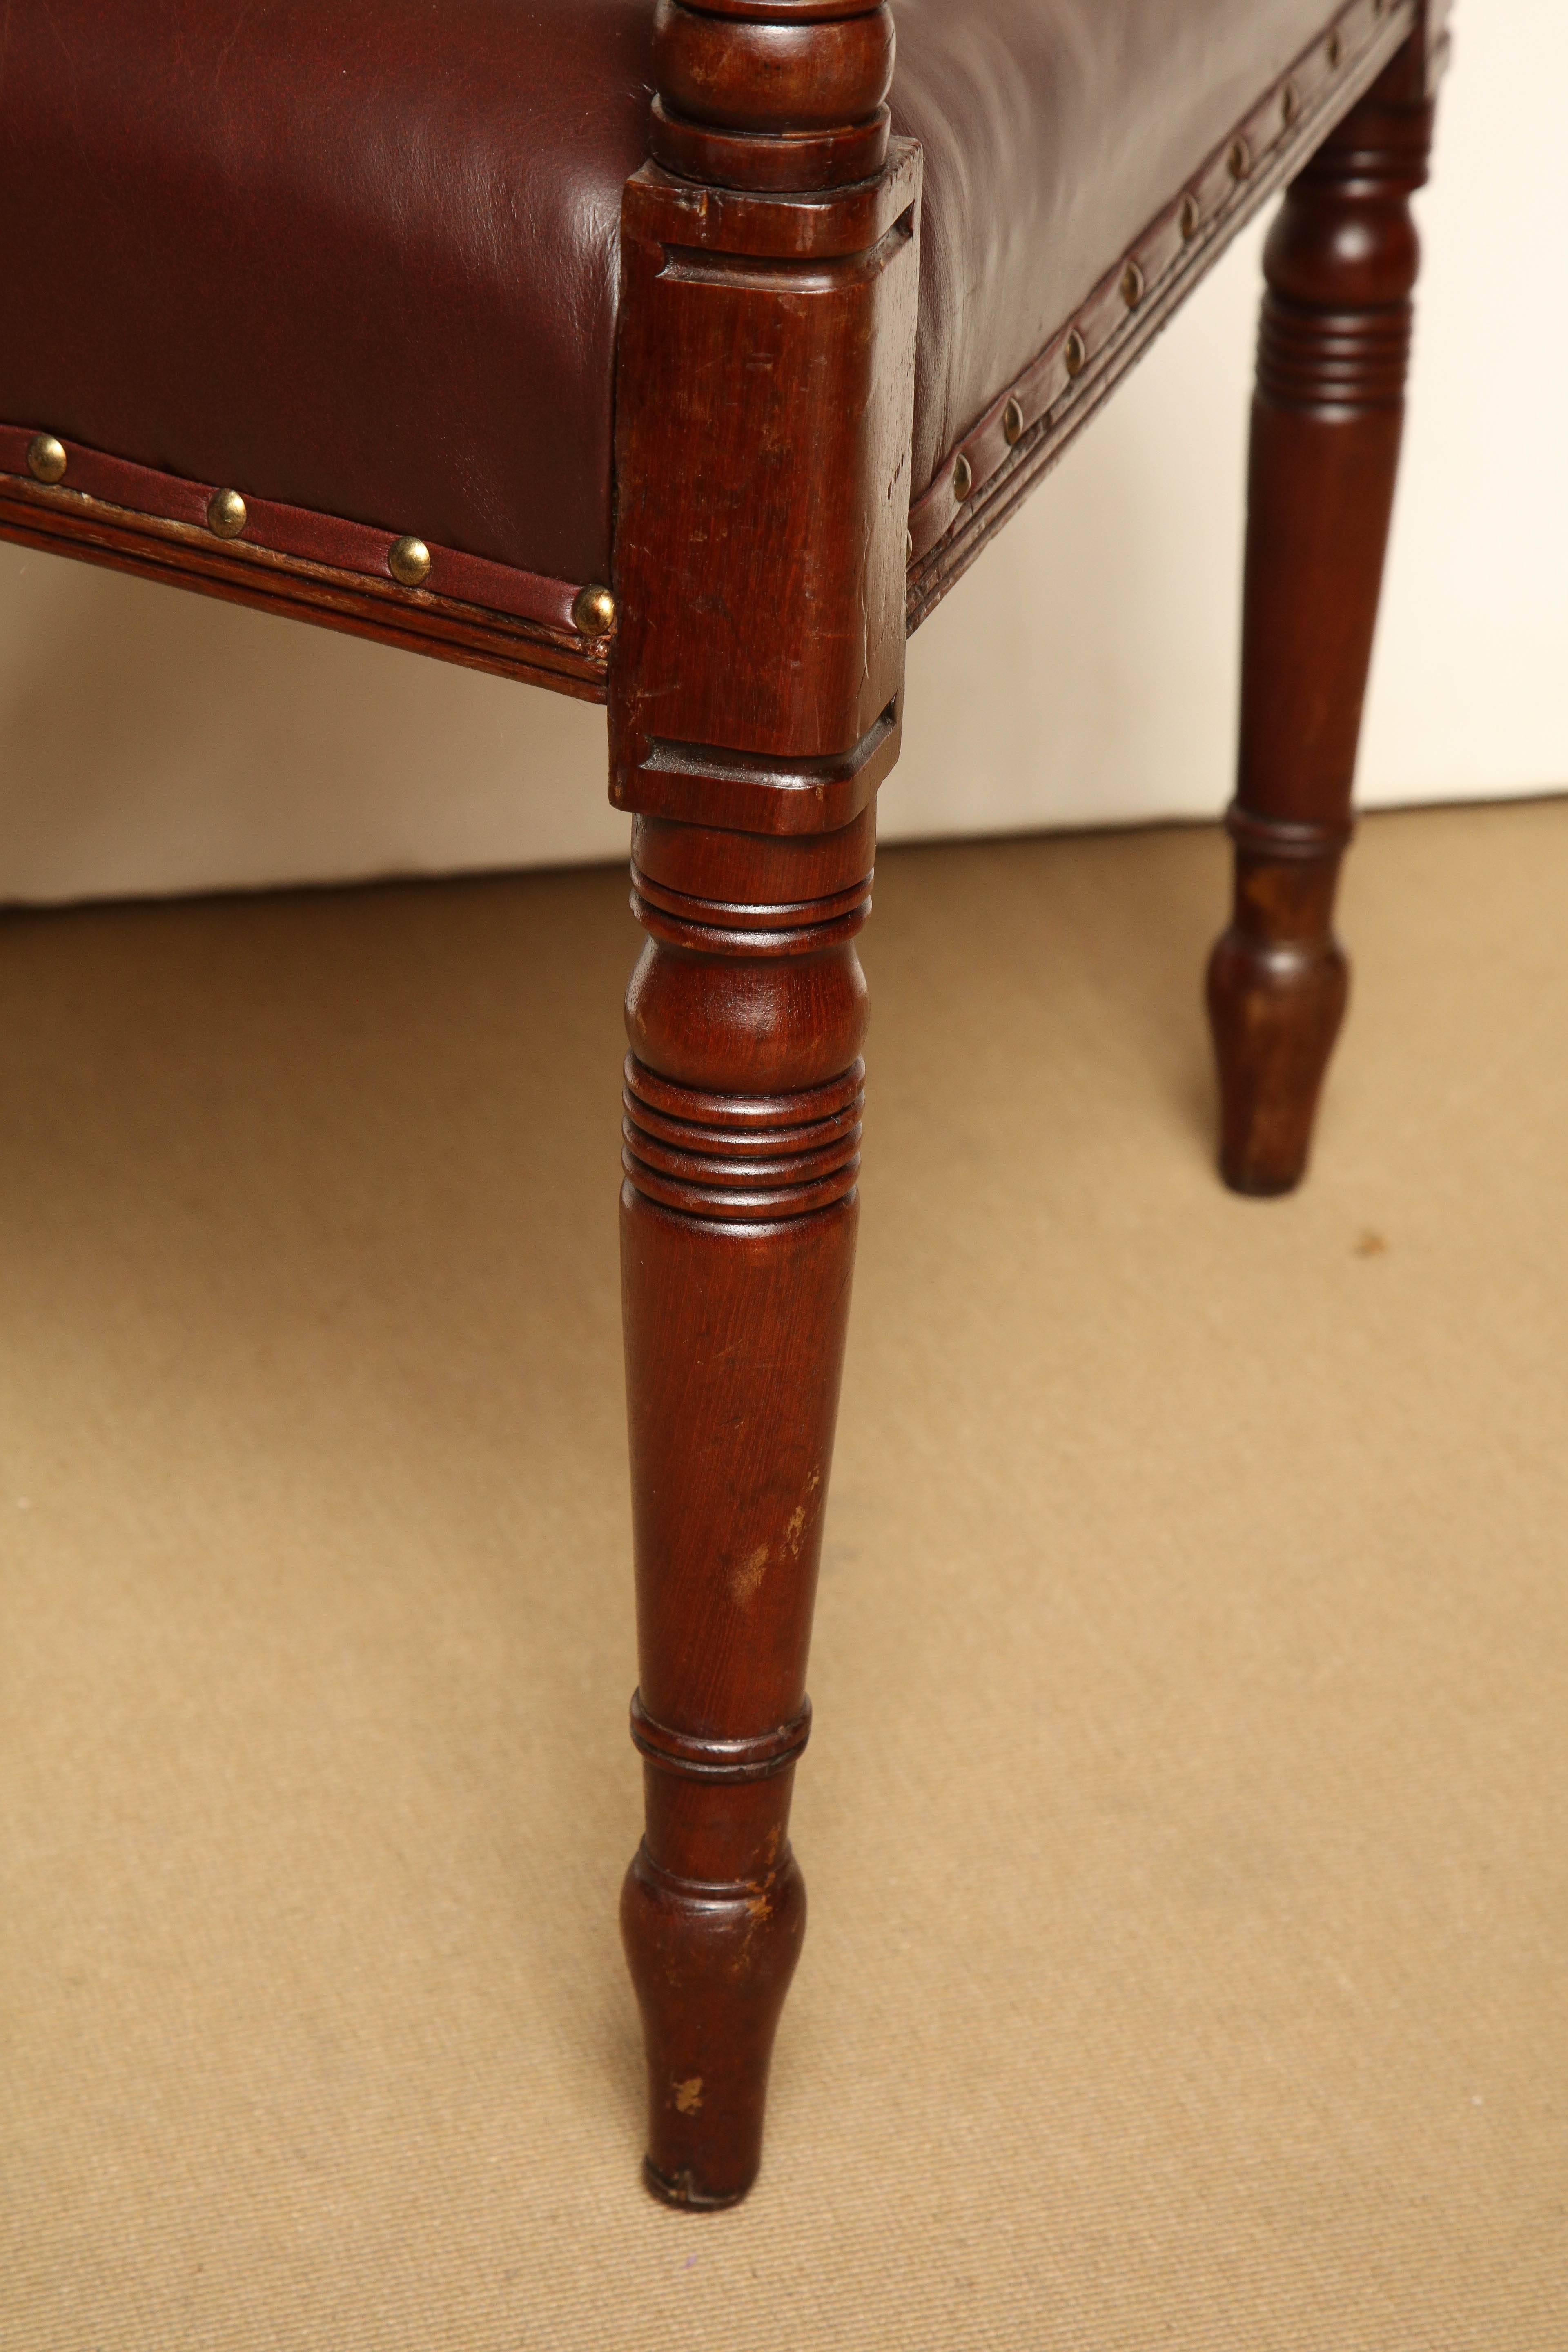 Early 19th Century English Regency, Mahogany and Brass Inlay Desk Chair For Sale 2